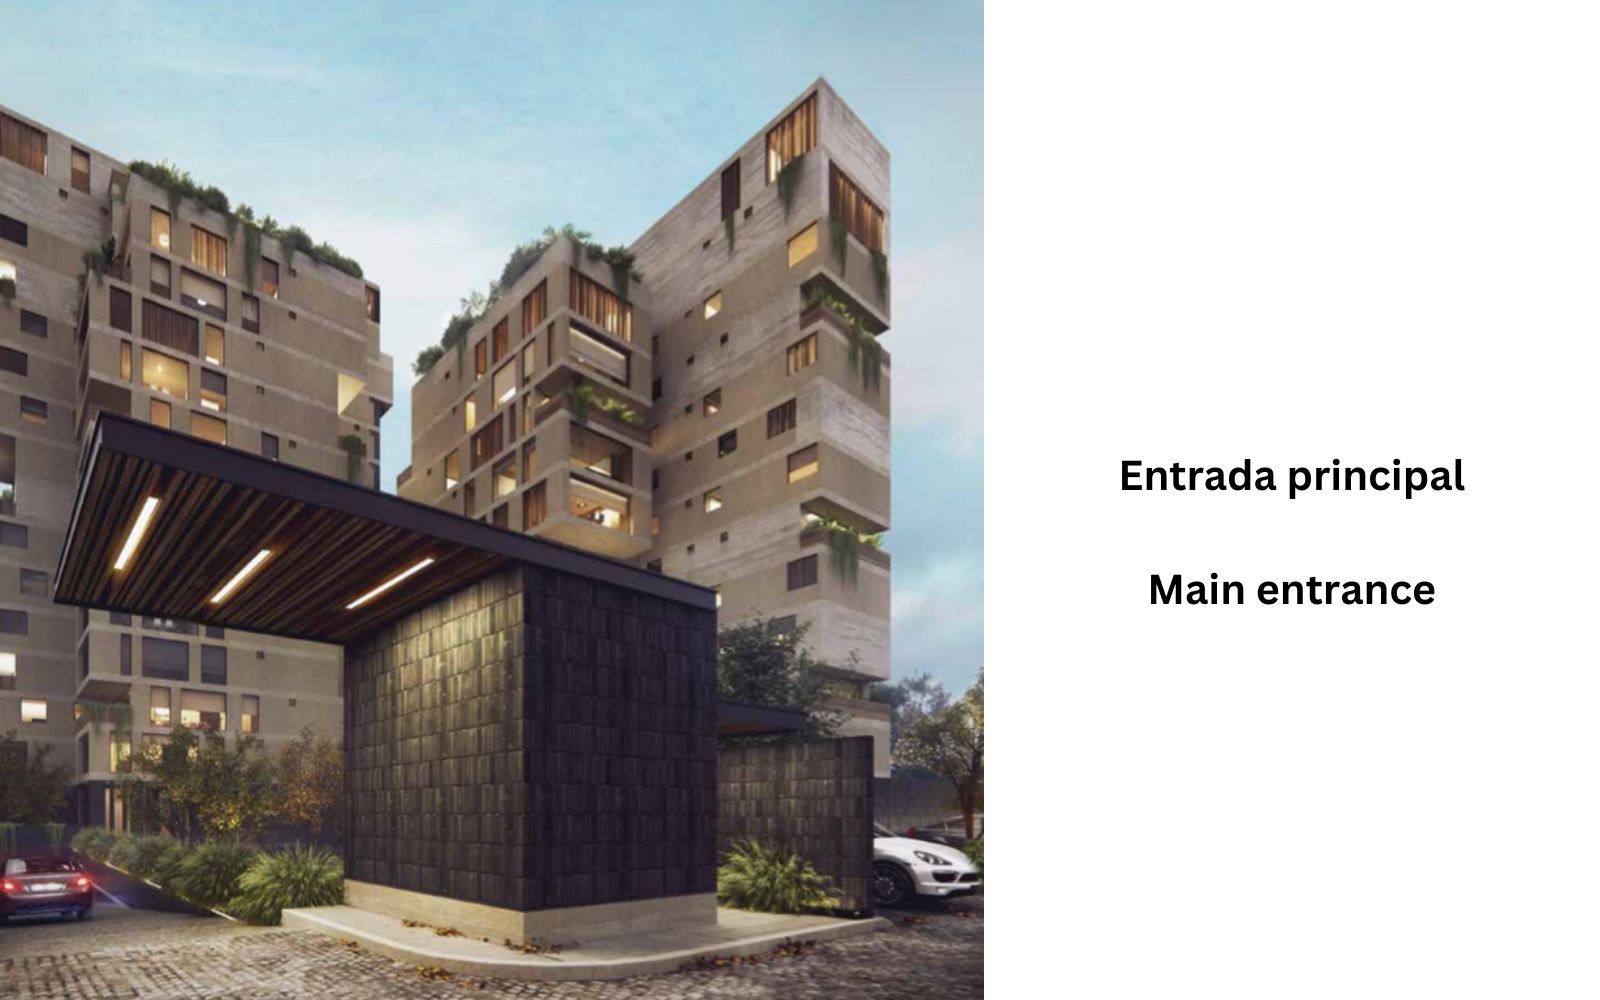 Condominium with paddle and tennis court, swimming pool, climbing wall, pre-construction, for sale, Querétaro.